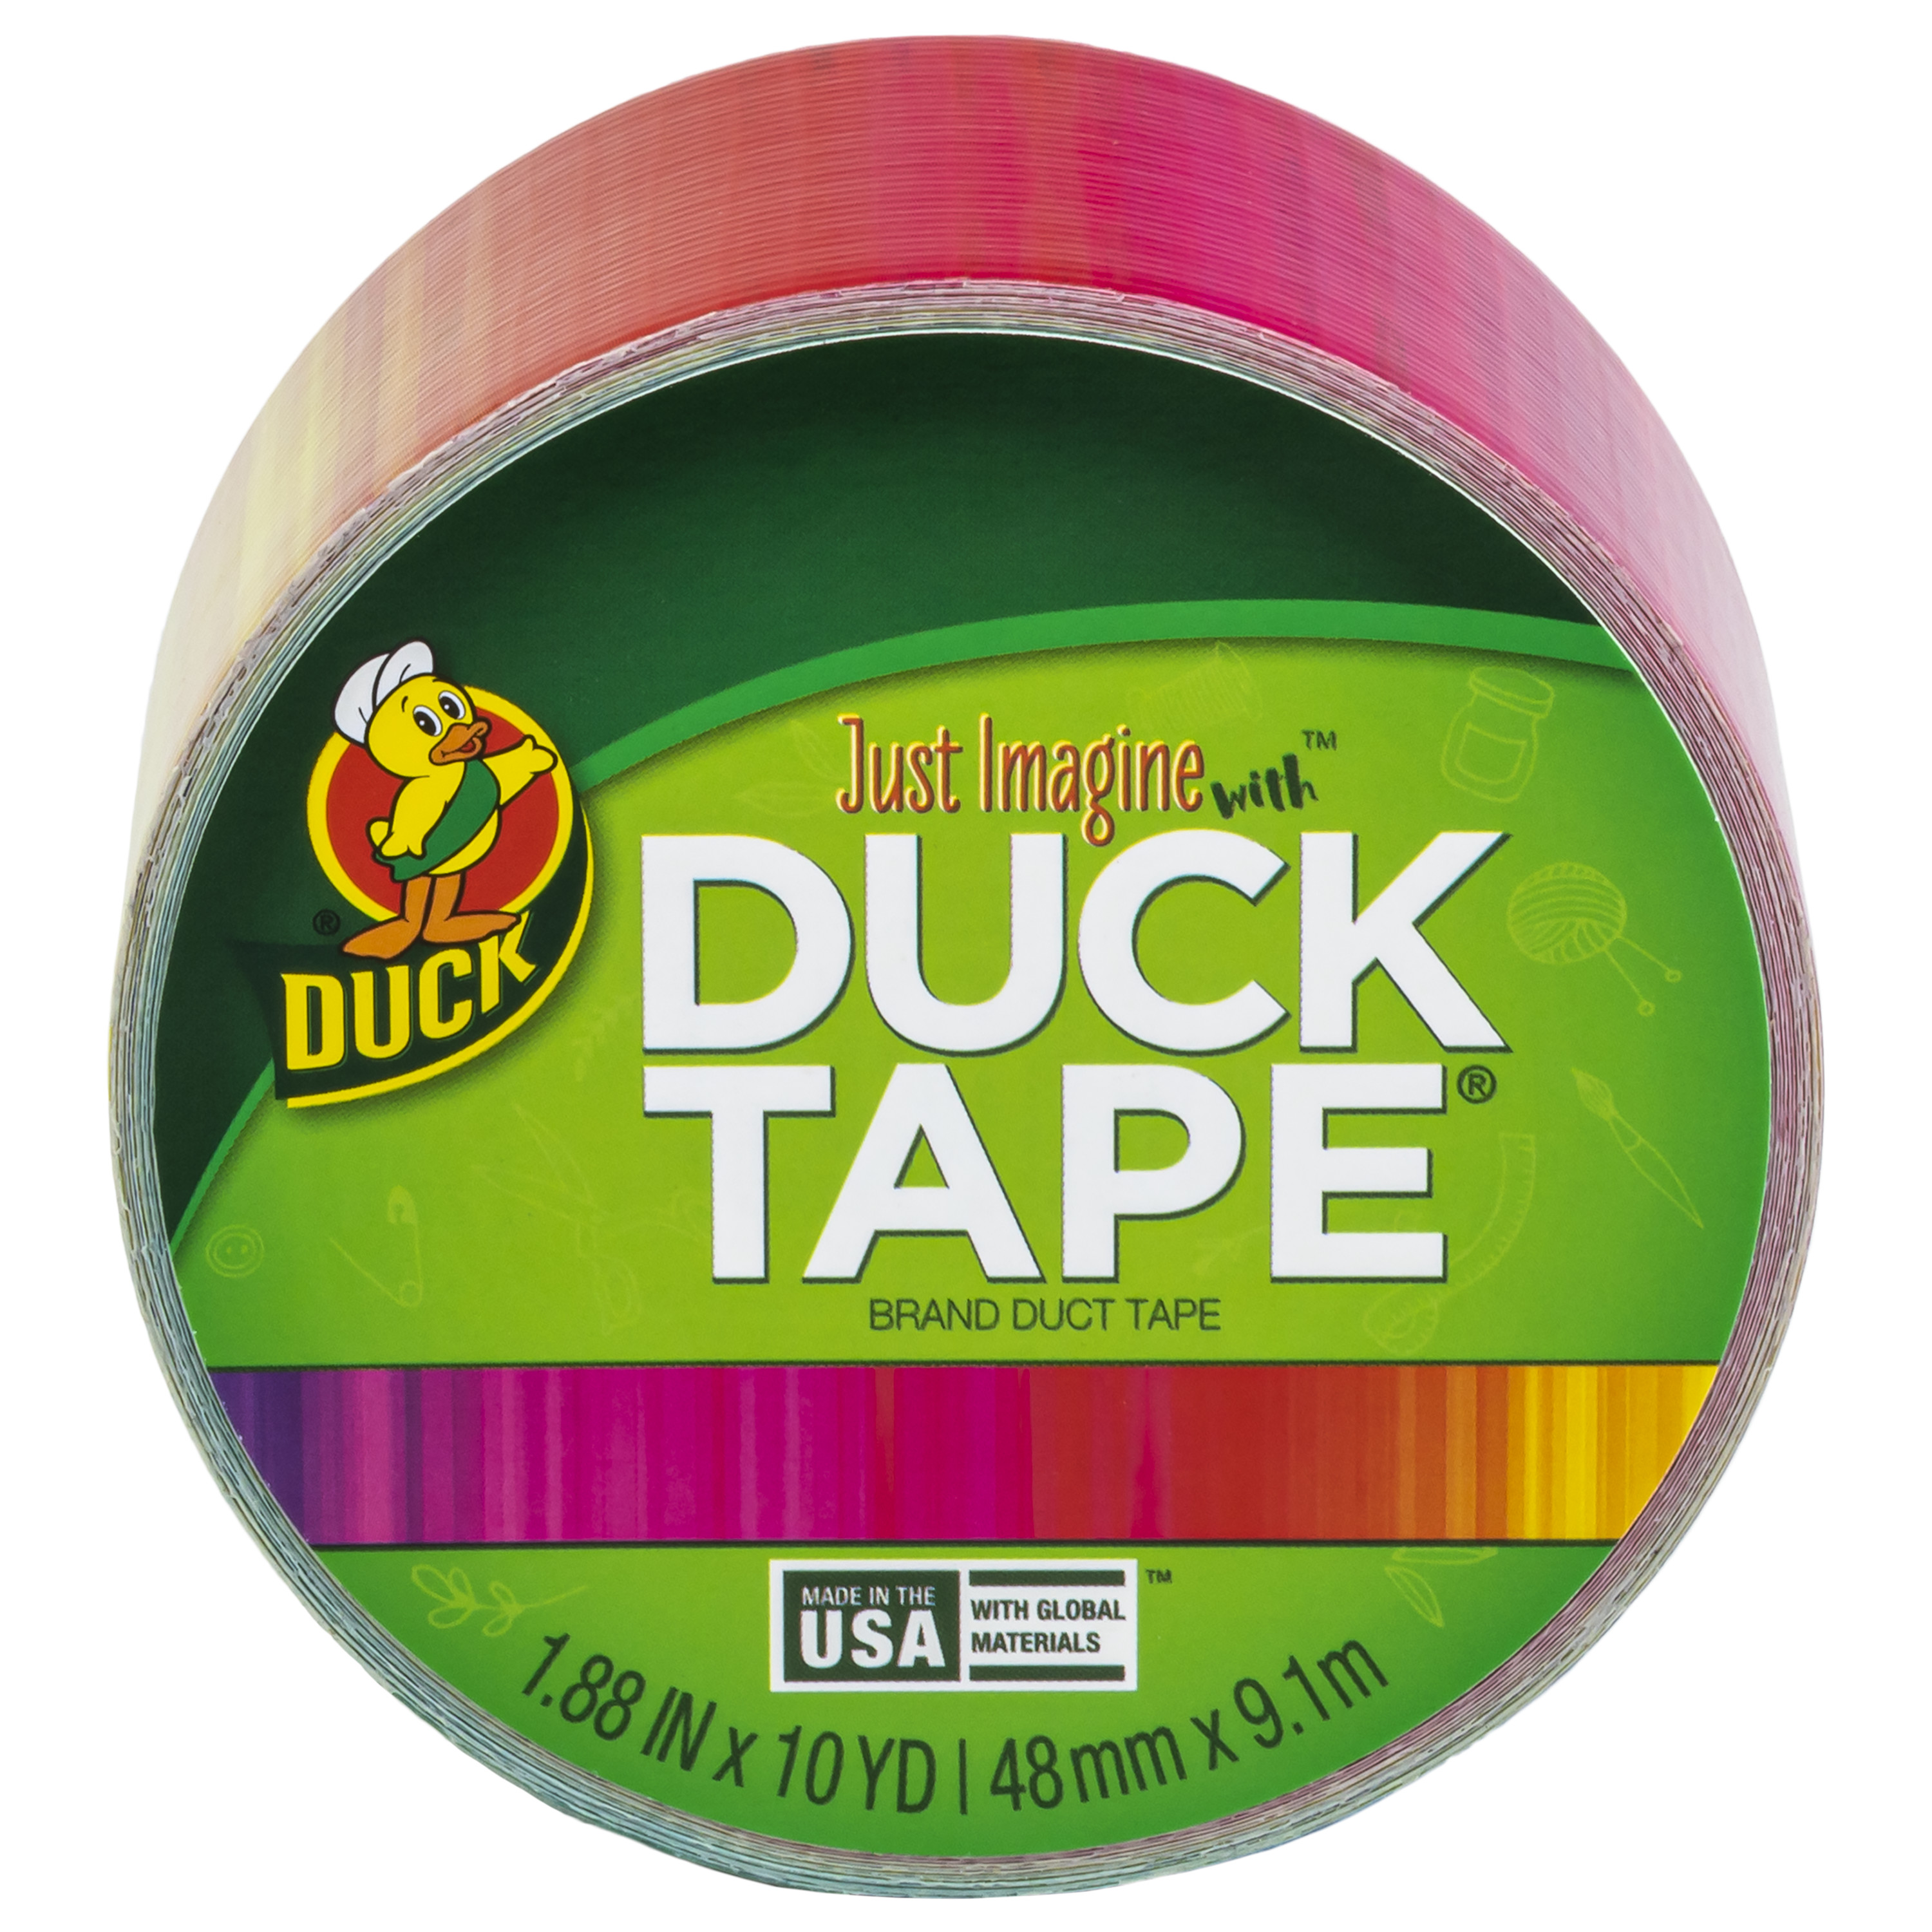 Printed Duck Tape Brand Duct Tape - Ombre Rainbow 10 Yards - image 1 of 8